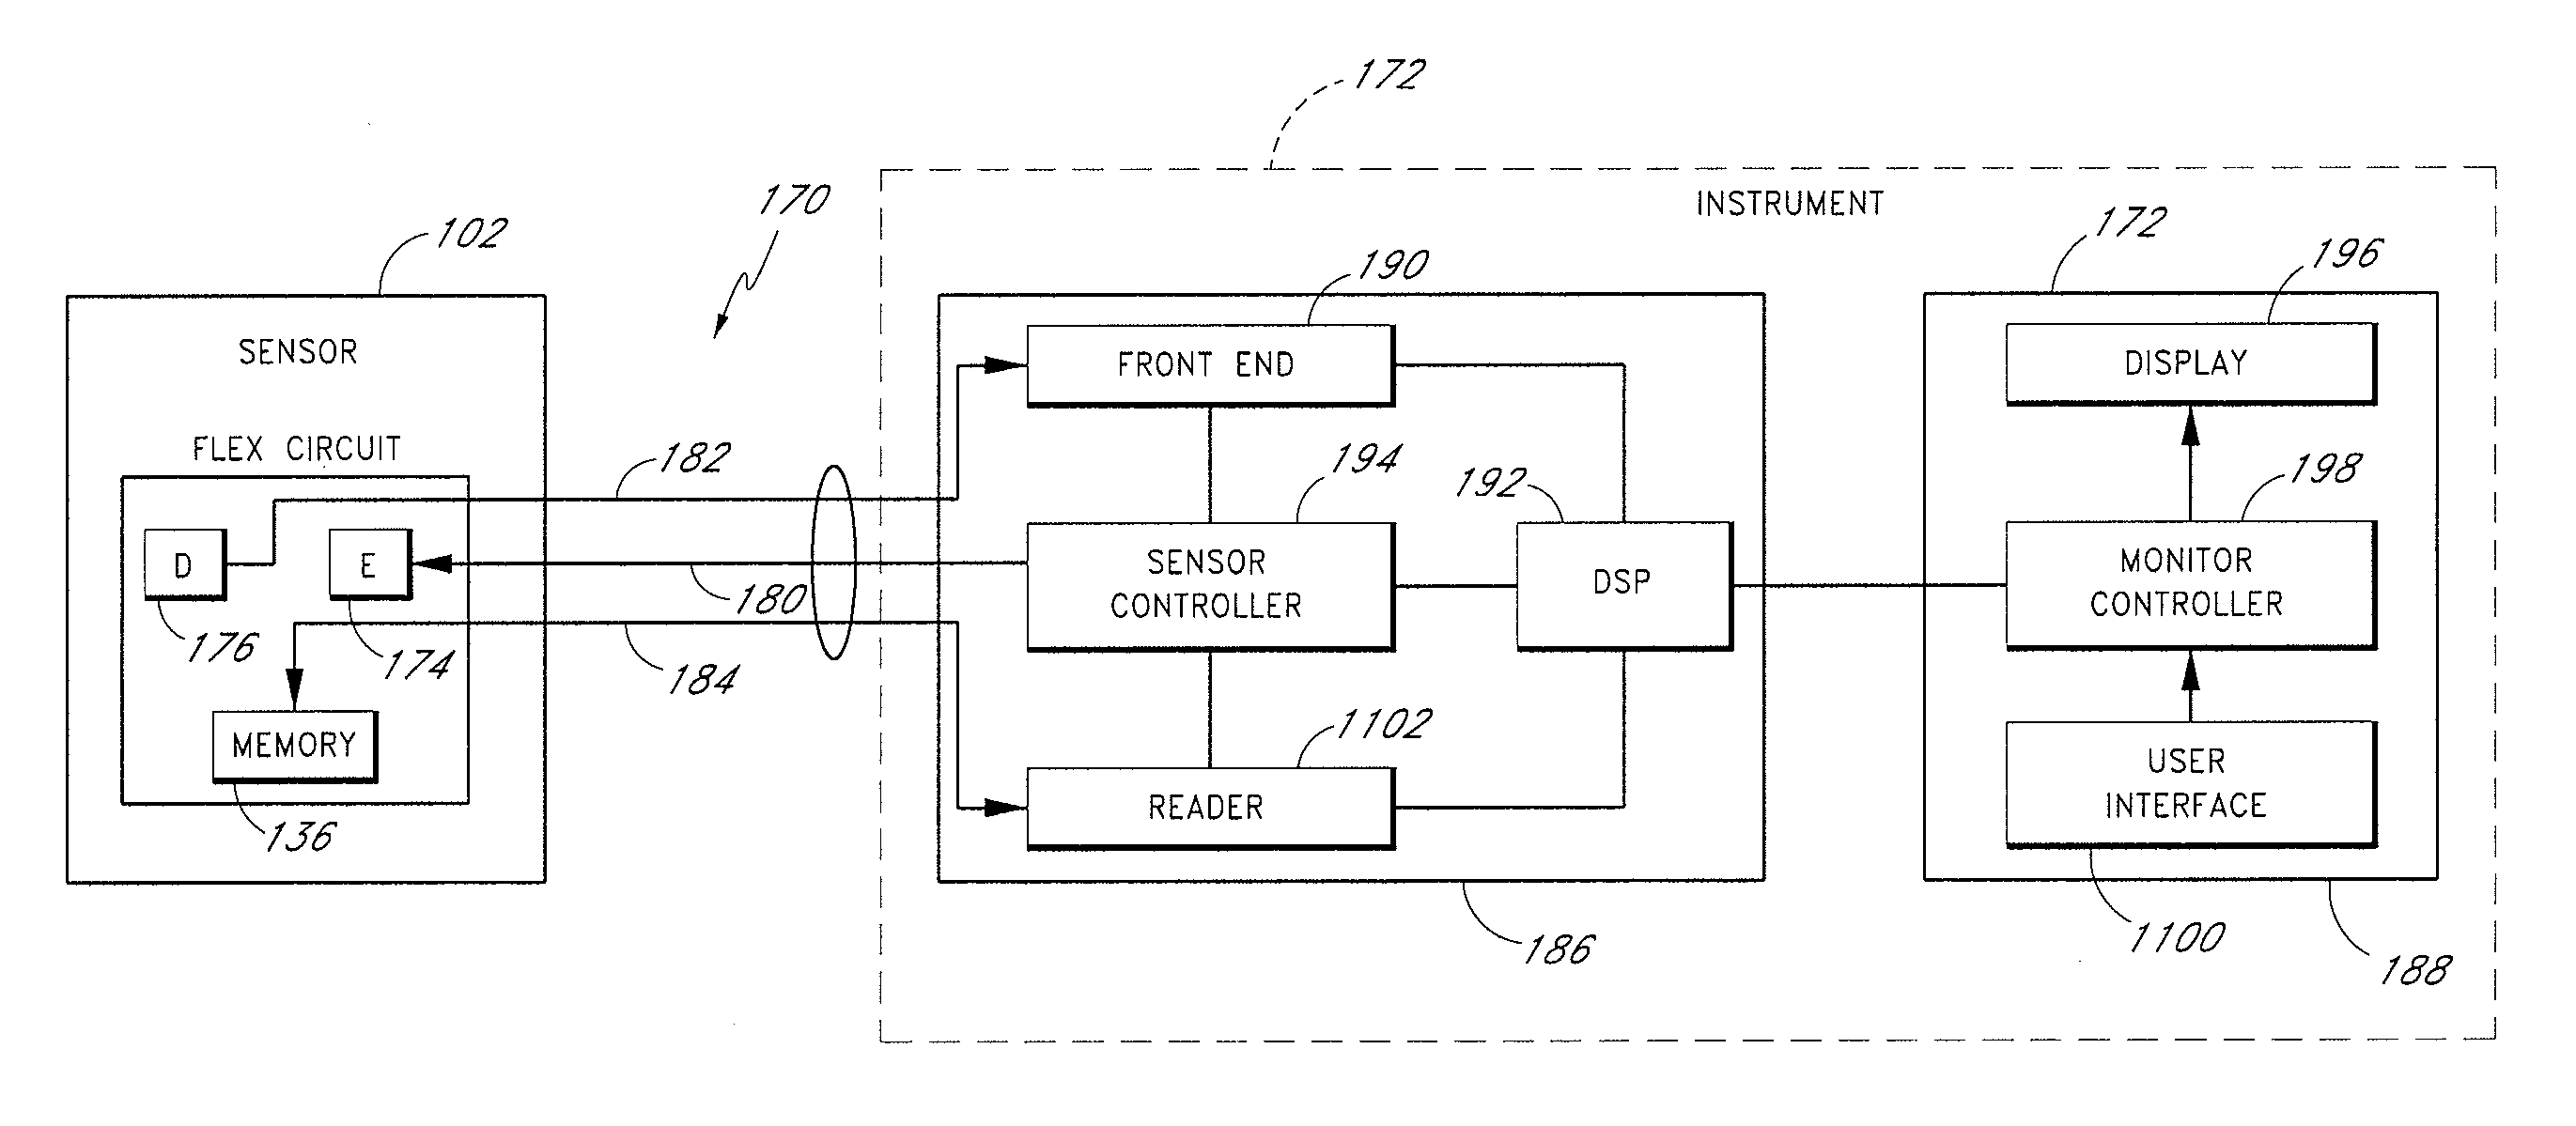 Optical sensor including disposable and reusable elements